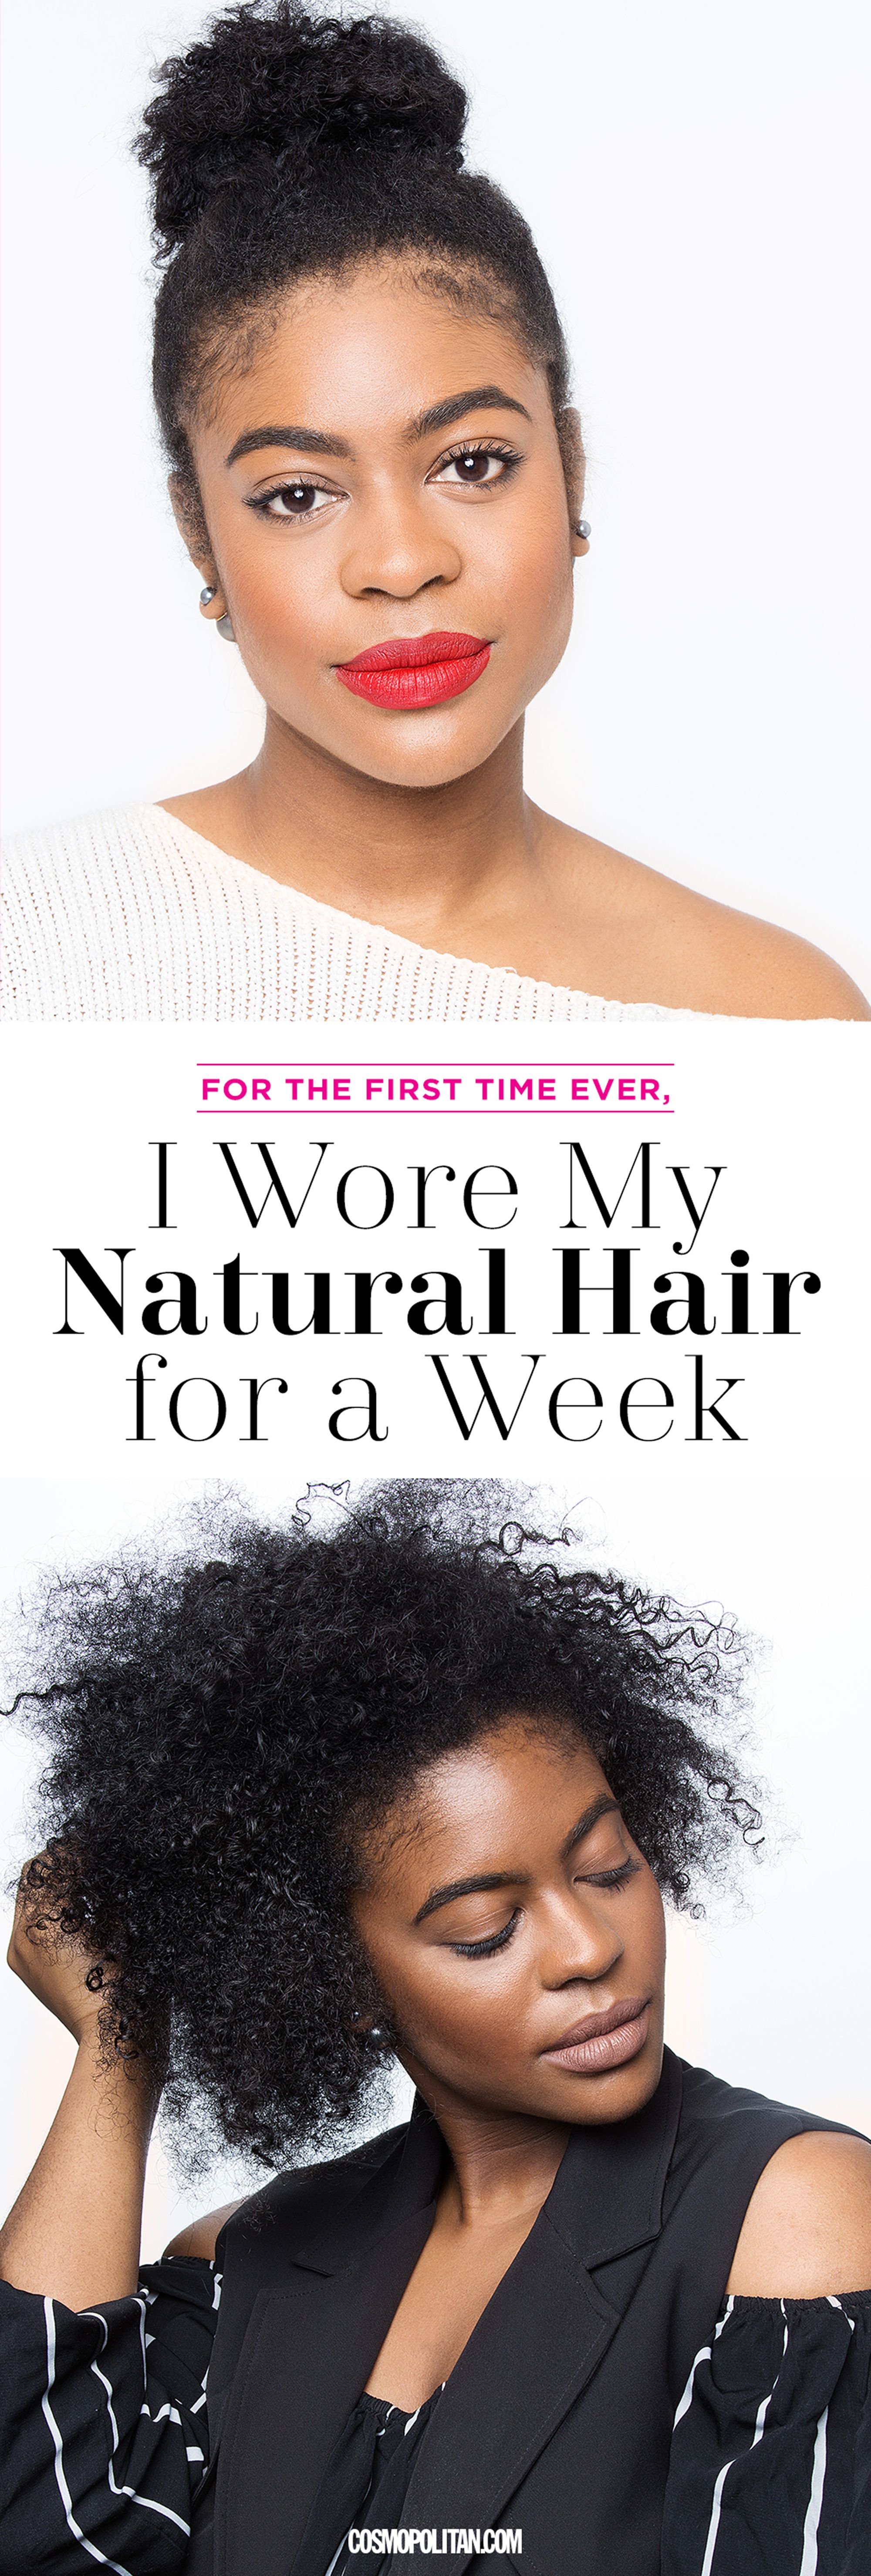 Pin on Natural hairstyle